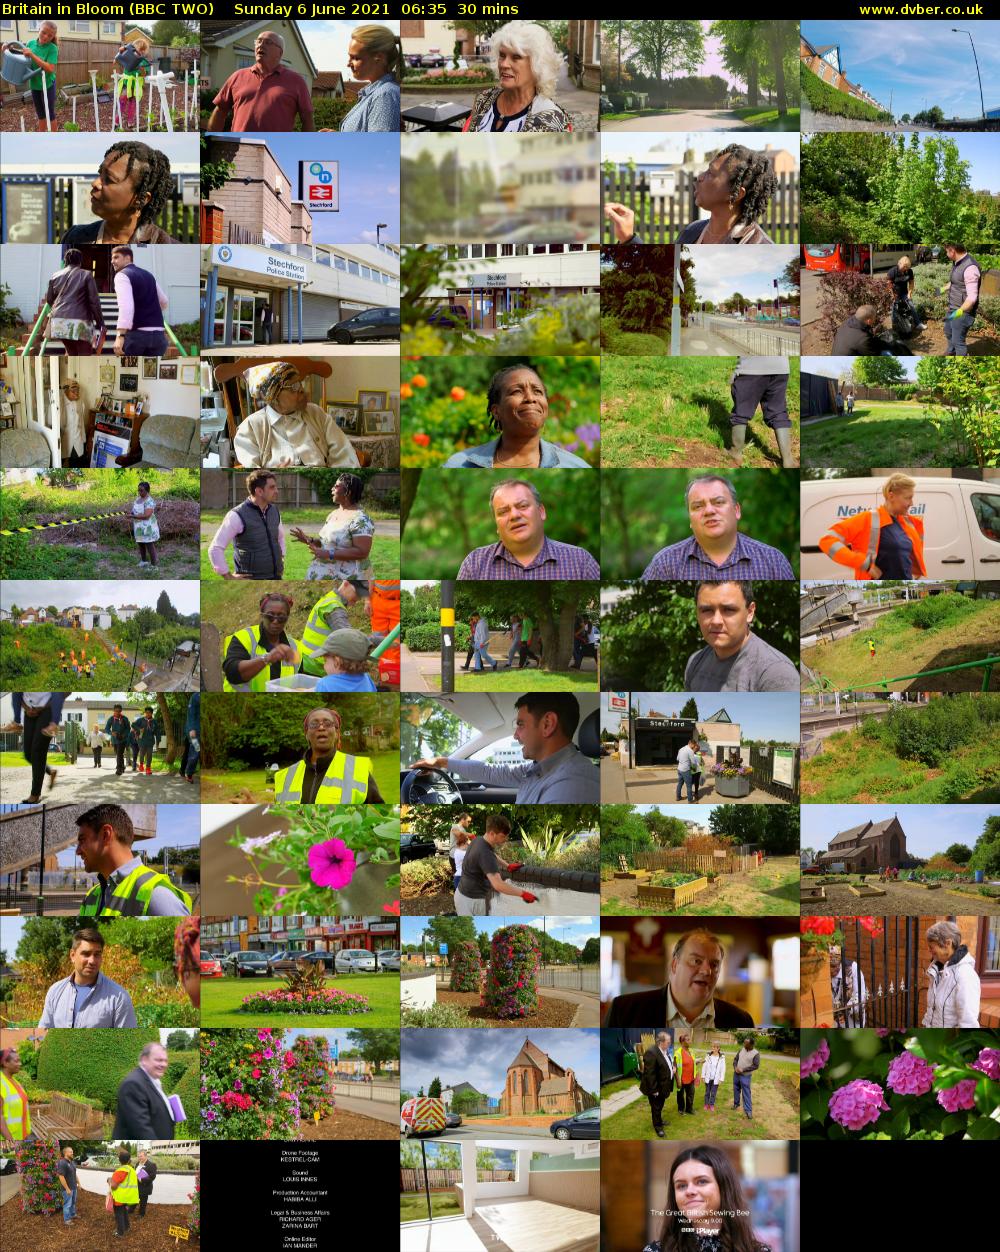 Britain in Bloom (BBC TWO) Sunday 6 June 2021 06:35 - 07:05